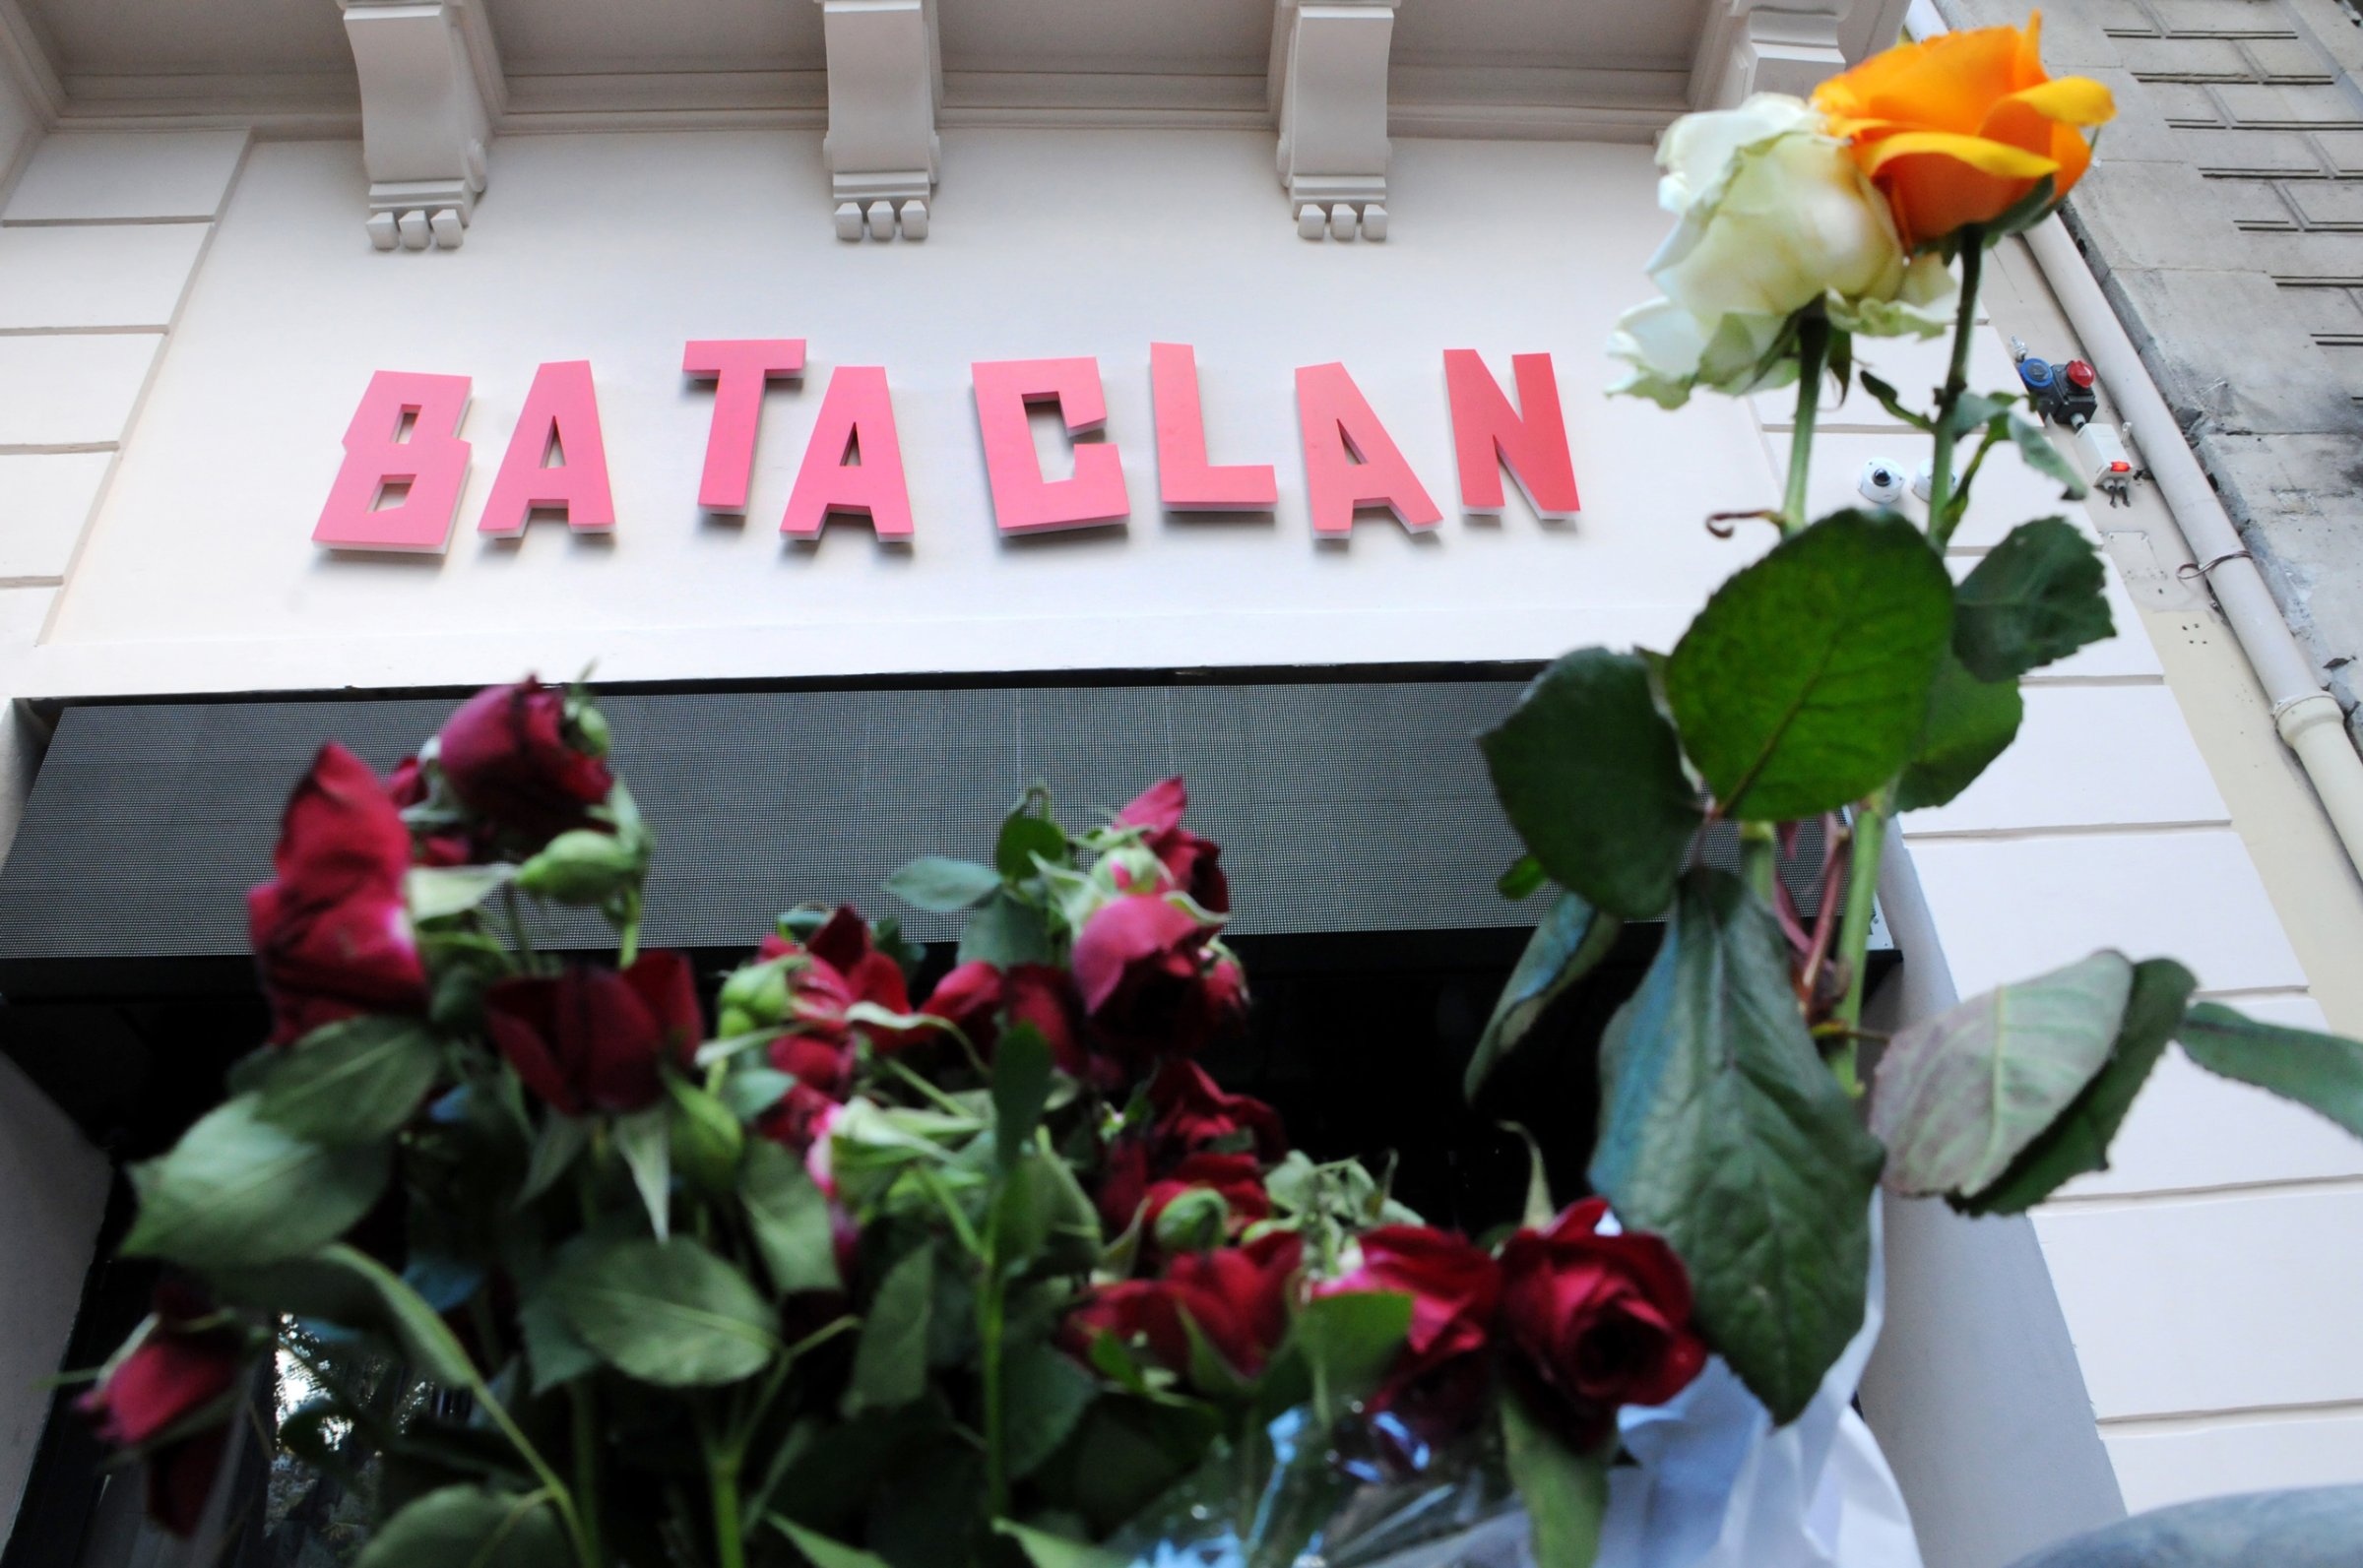 A picture taken on November 6, 2016 in Paris shows new lettering on the facade of the Bataclan concert hall, one of the targets of the November 13, 2015 terrorist attacks during which 130 people were killed and another 413 were wounded. The Bataclan concert hall will re-open on November 16 with a concert by British musician Peter Doherty. Photo by Alain Apaydin/Sipa USA